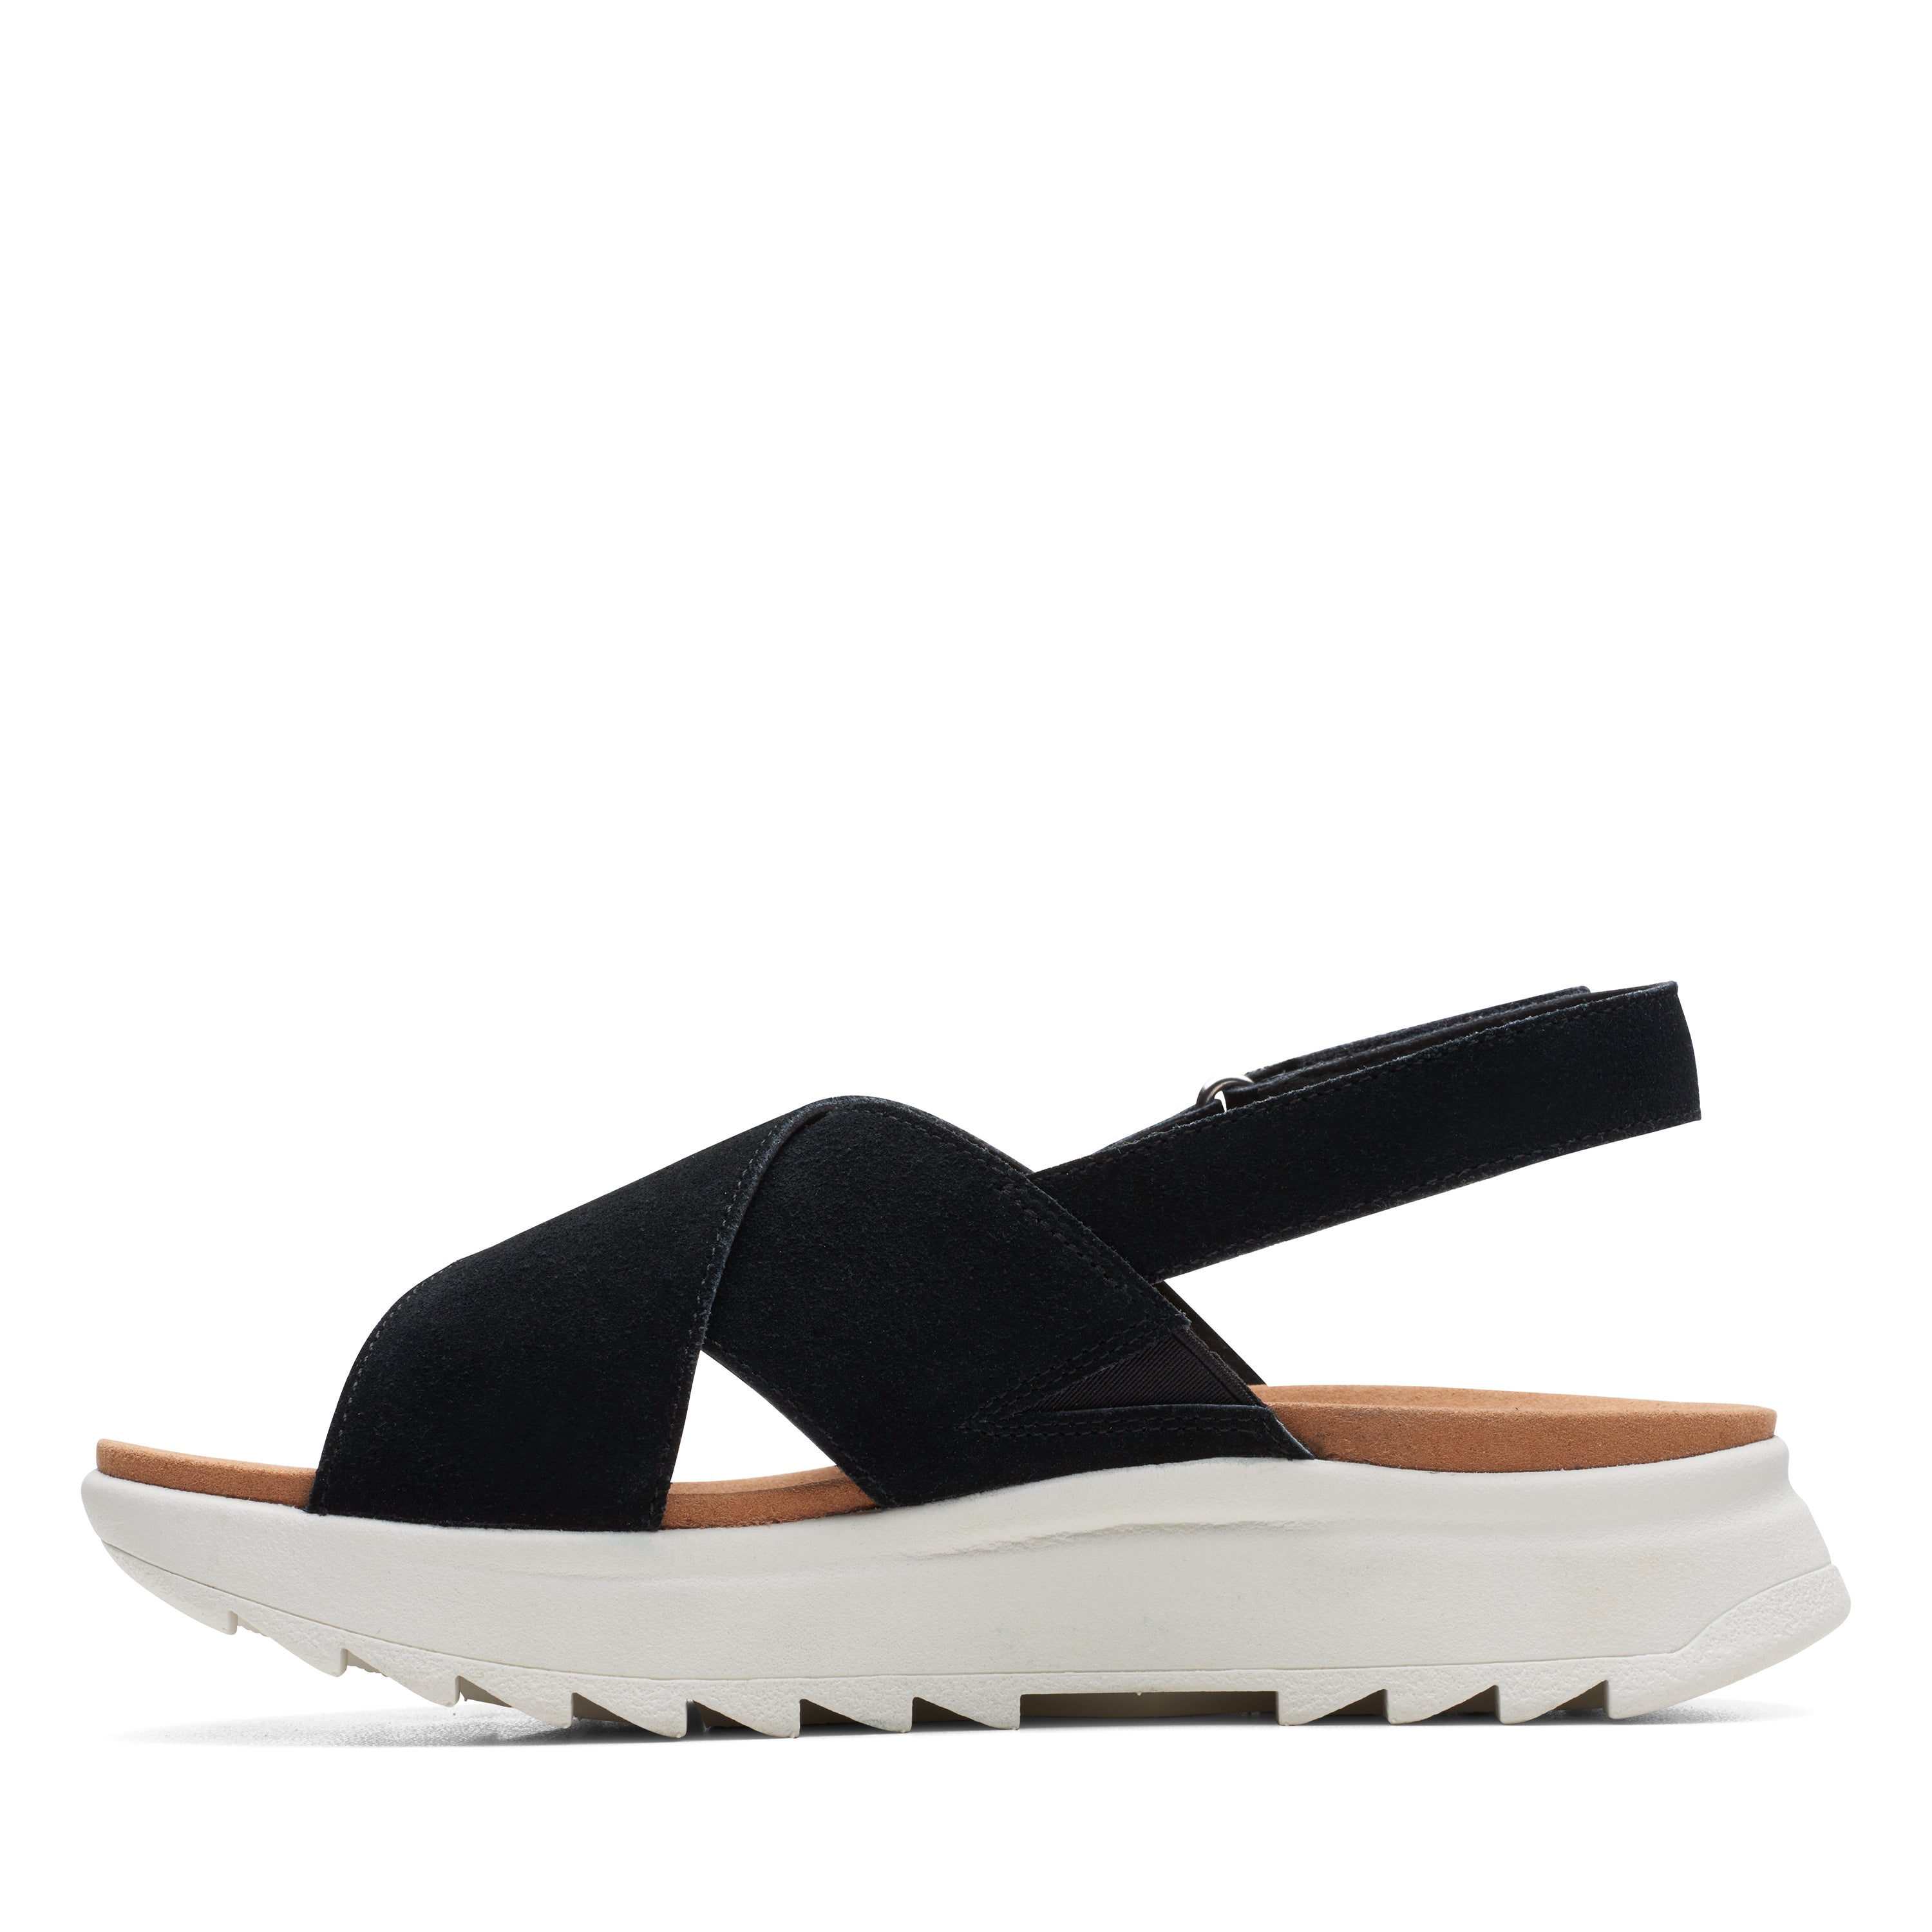 Clarks BOTANIC IVY White - Free delivery | Spartoo NET ! - Shoes Sandals  Women USD/$78.40